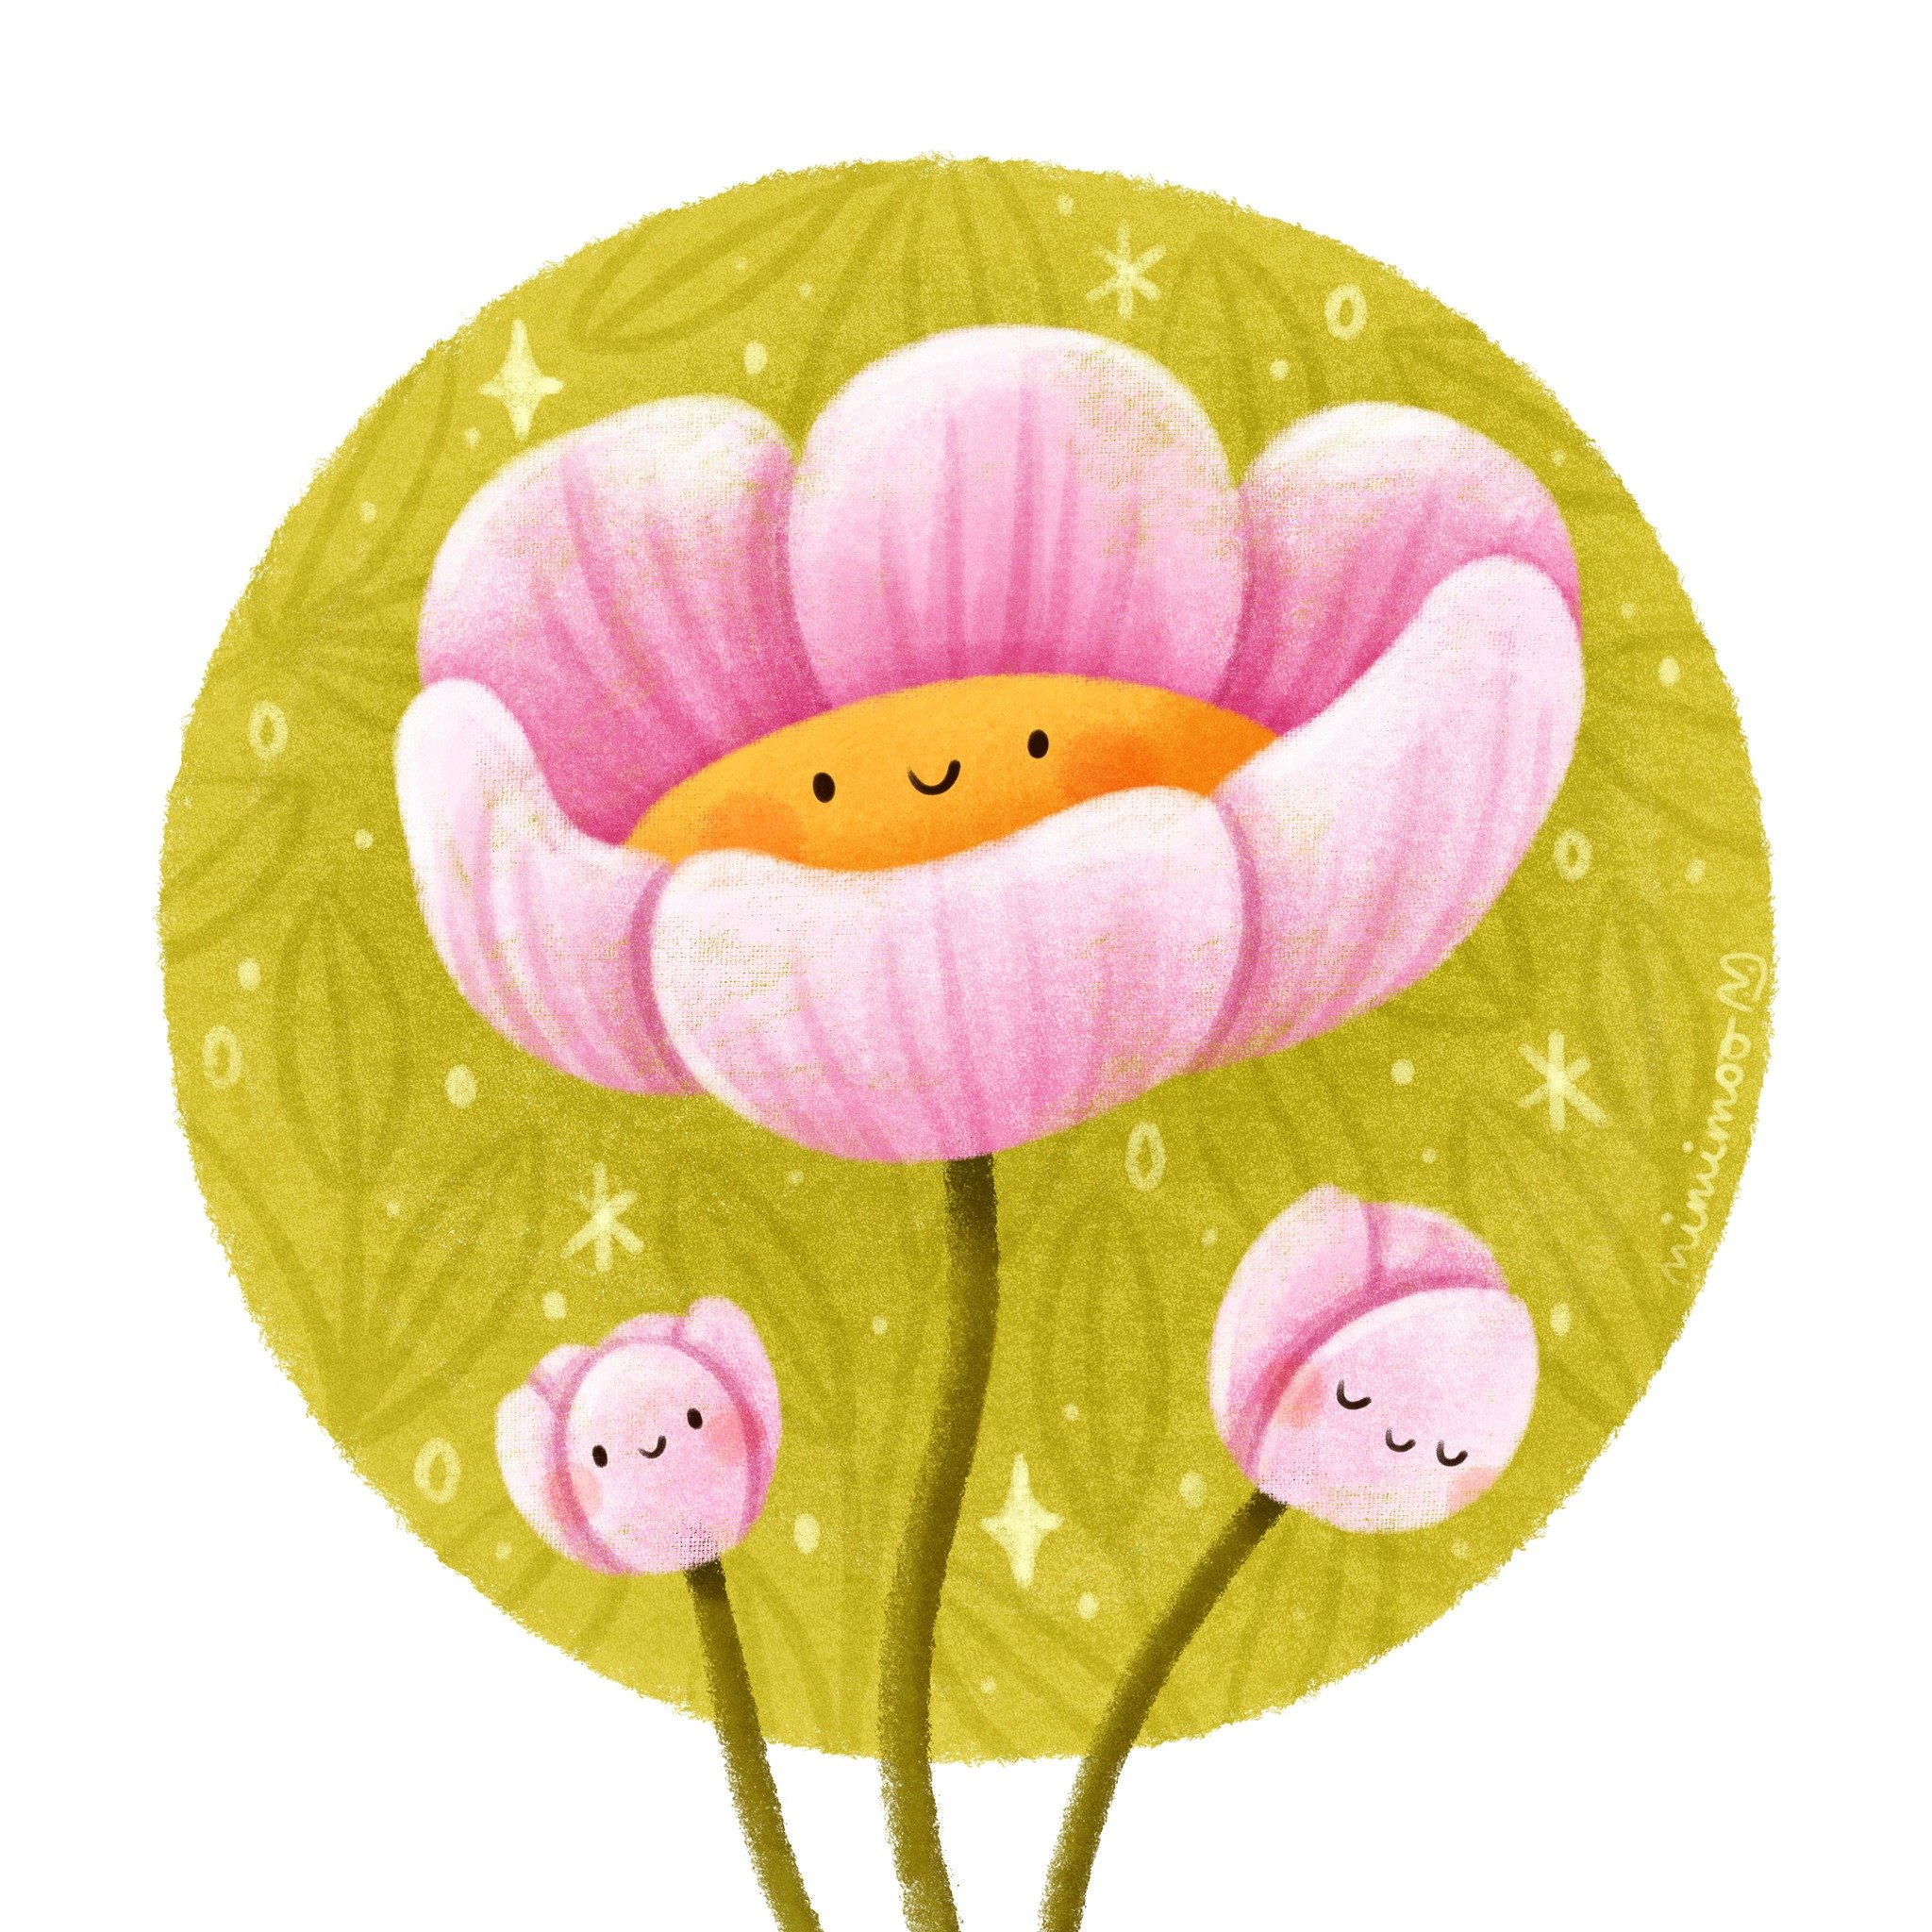 Playing around with some different backgrounds lately as part of my daily drawing, I quite liked adding a subtle pattern to this one 🌷✨

Brushes I used (from my brush packs):
🌷 Mimi Simple Sketching for initial sketch
🌷 Mimi Canvas Brush and Big F